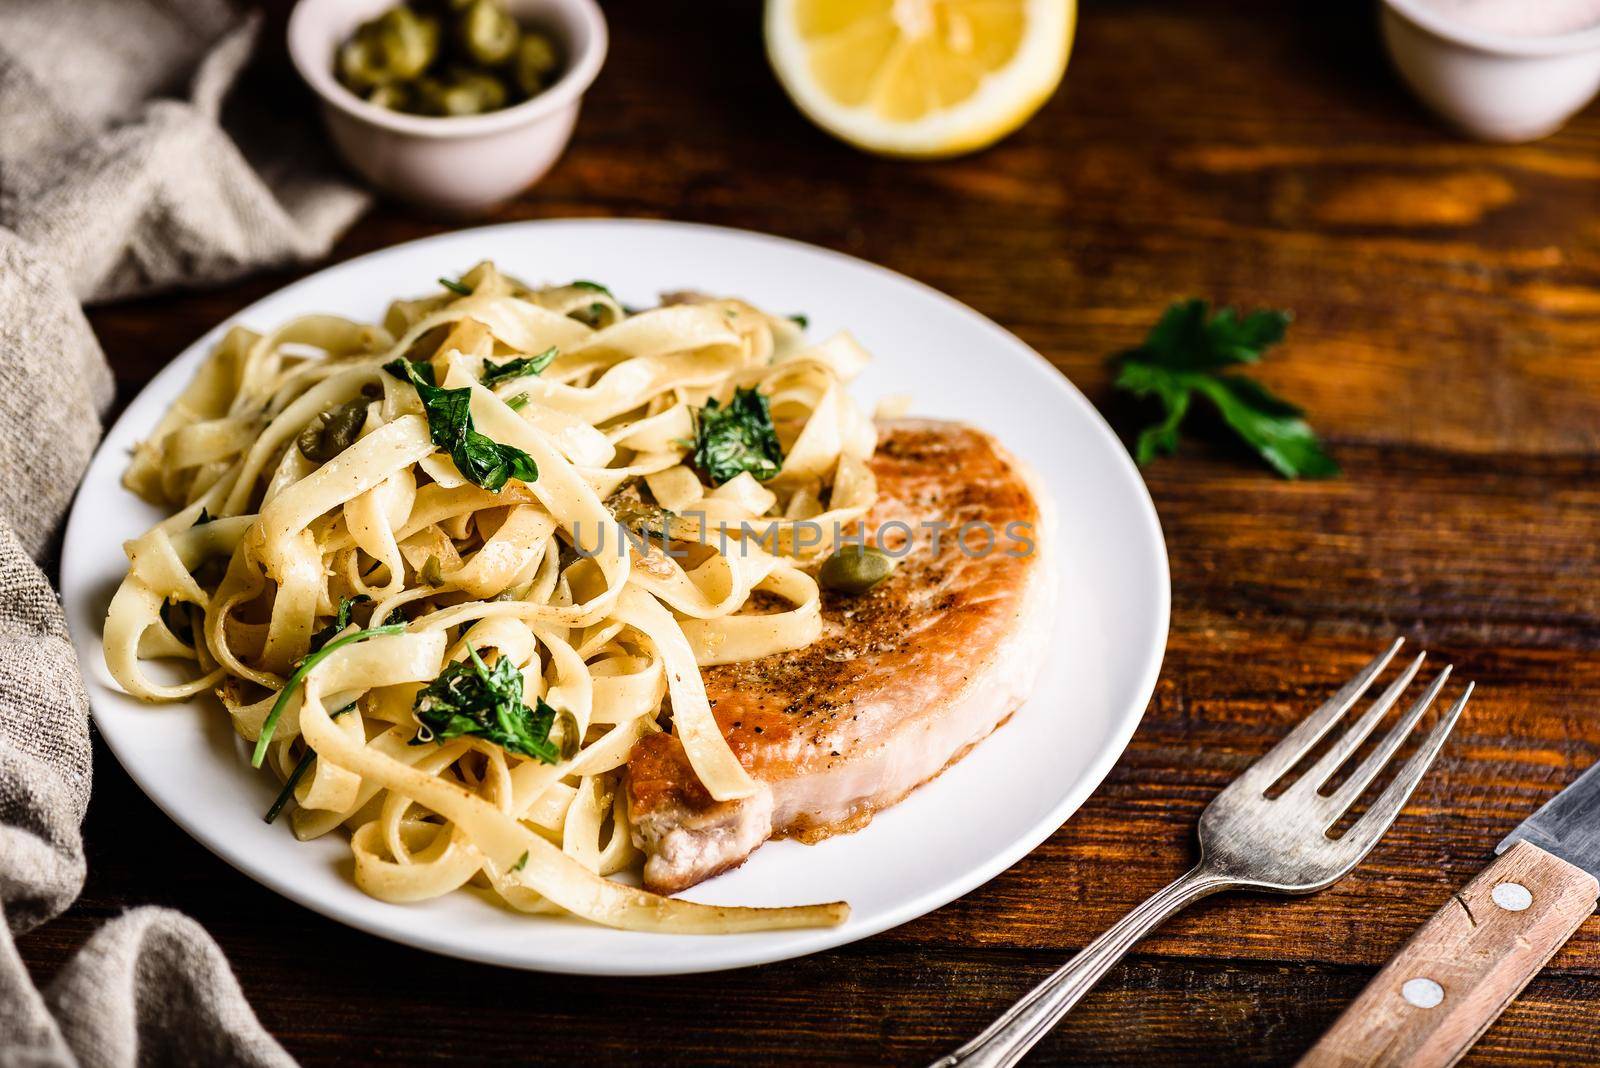 Pork chop steak and pasta with capers and lemon zest